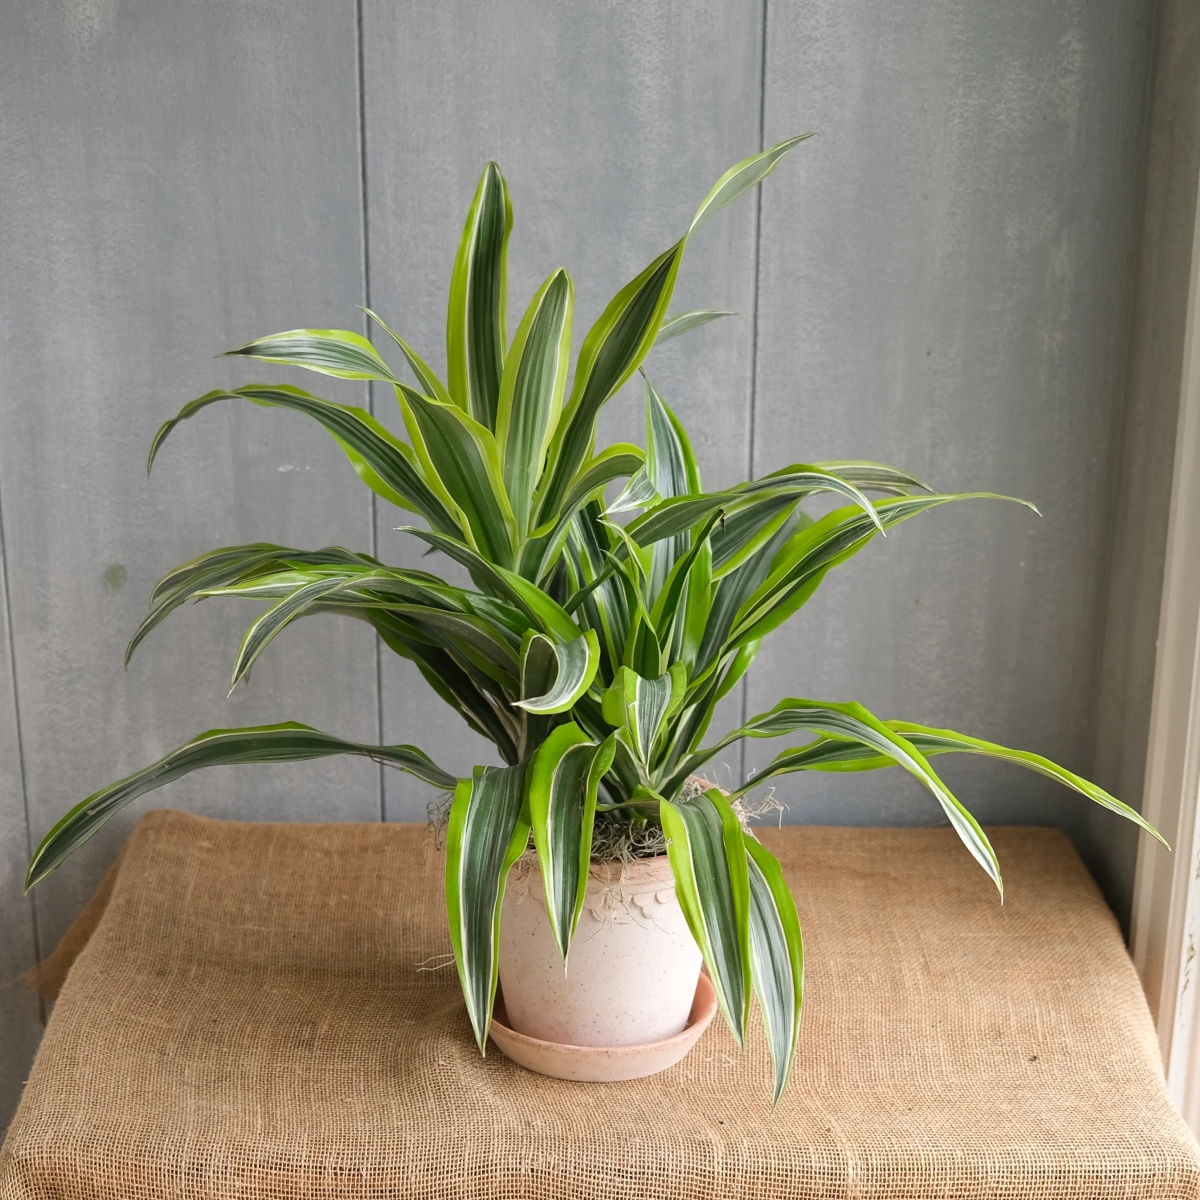 Dracaena plant with yellow and green striped leaves